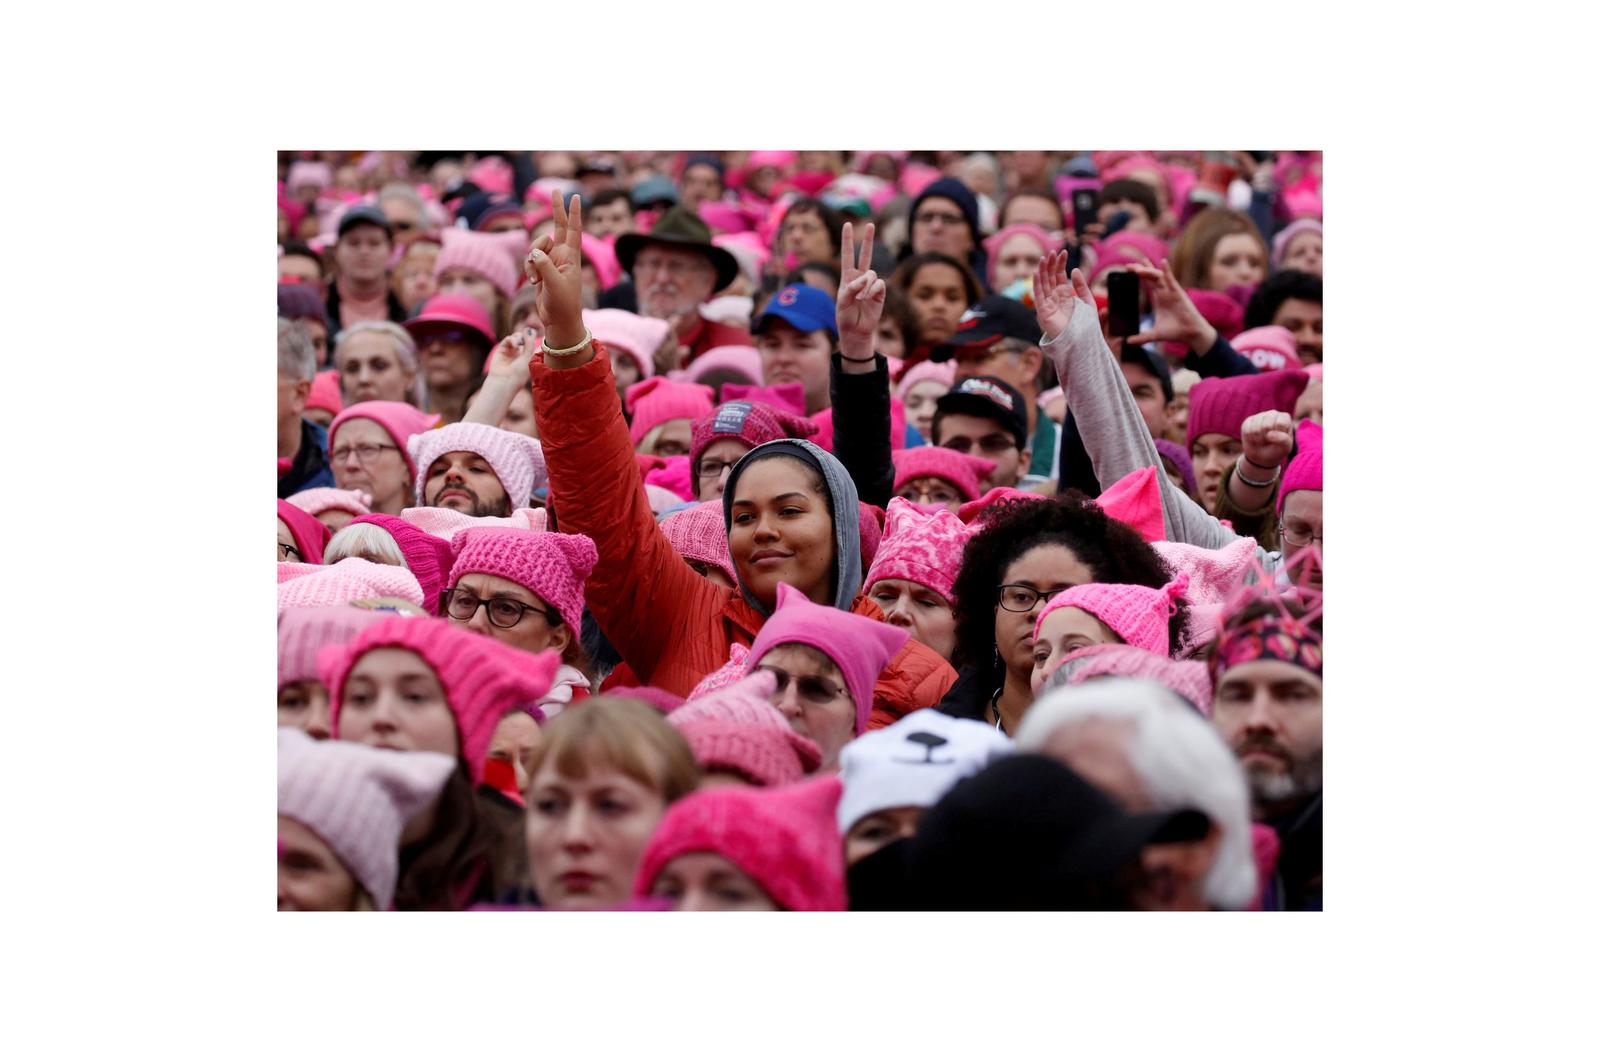 People gather for the Women’s March in Washington